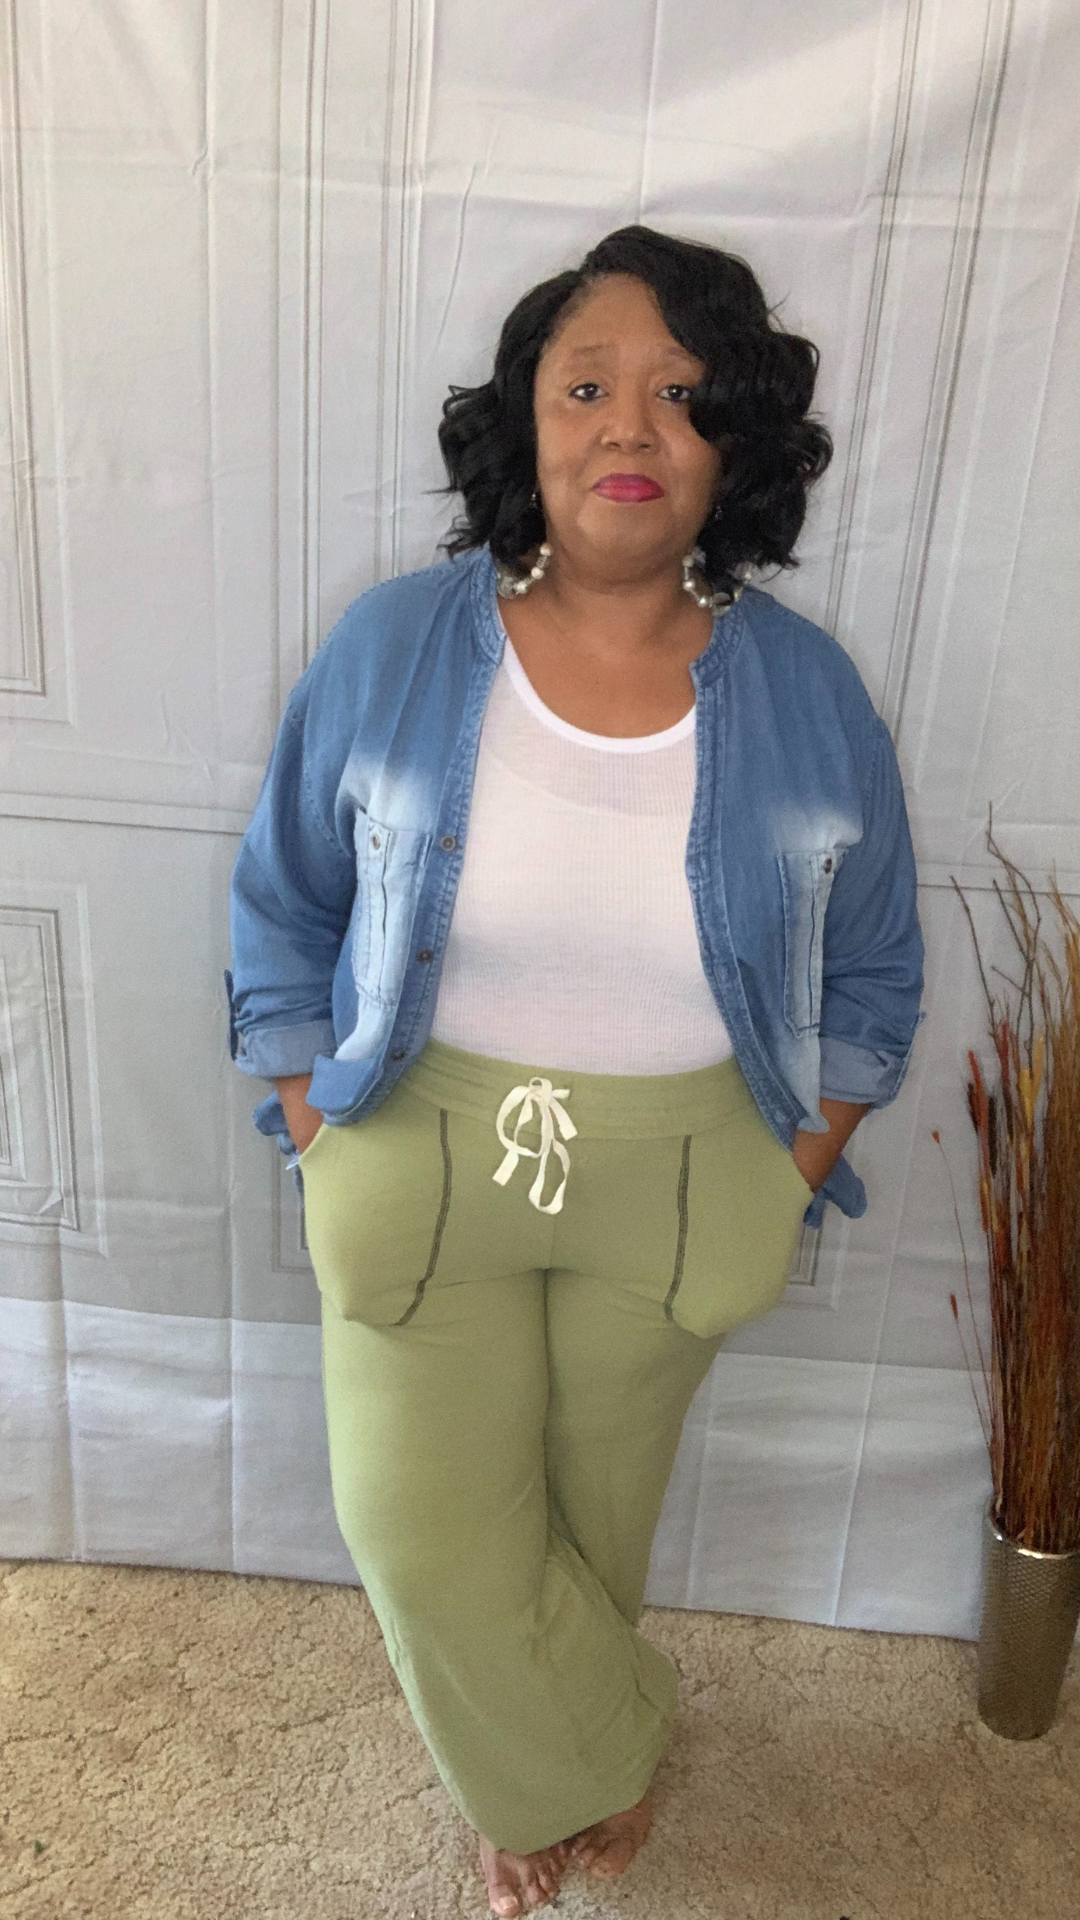 Plus Size Green Elastic Waist Sage Track Pants, You + All